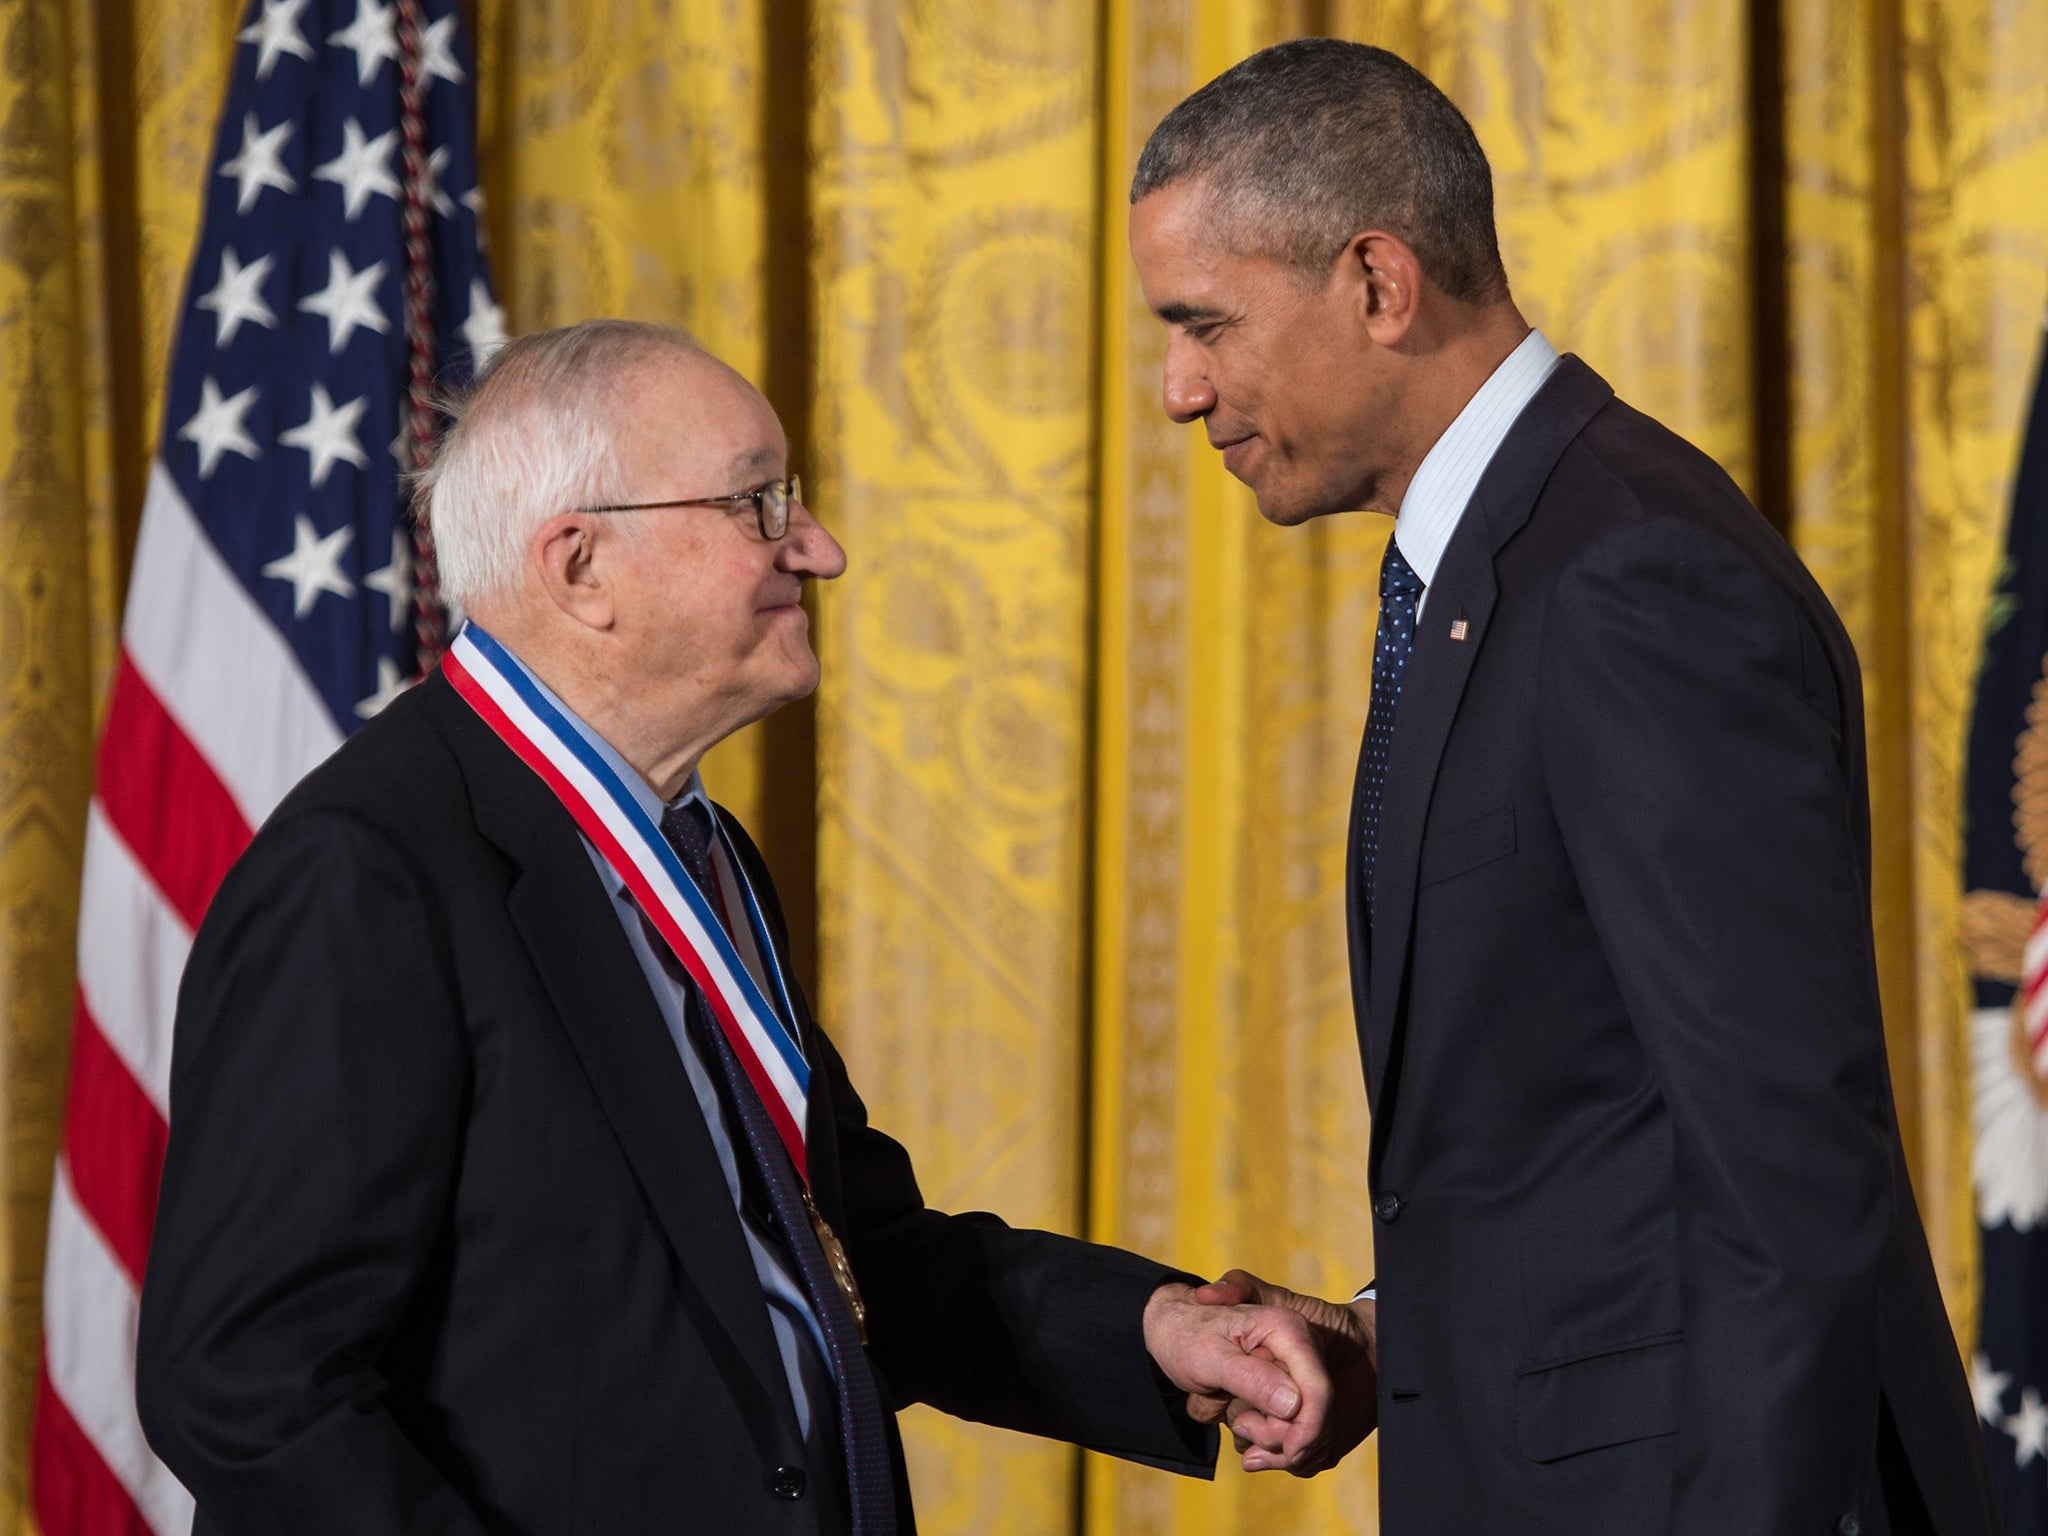 Barack Obama awards the National Medal of Science to Bandura in 2016